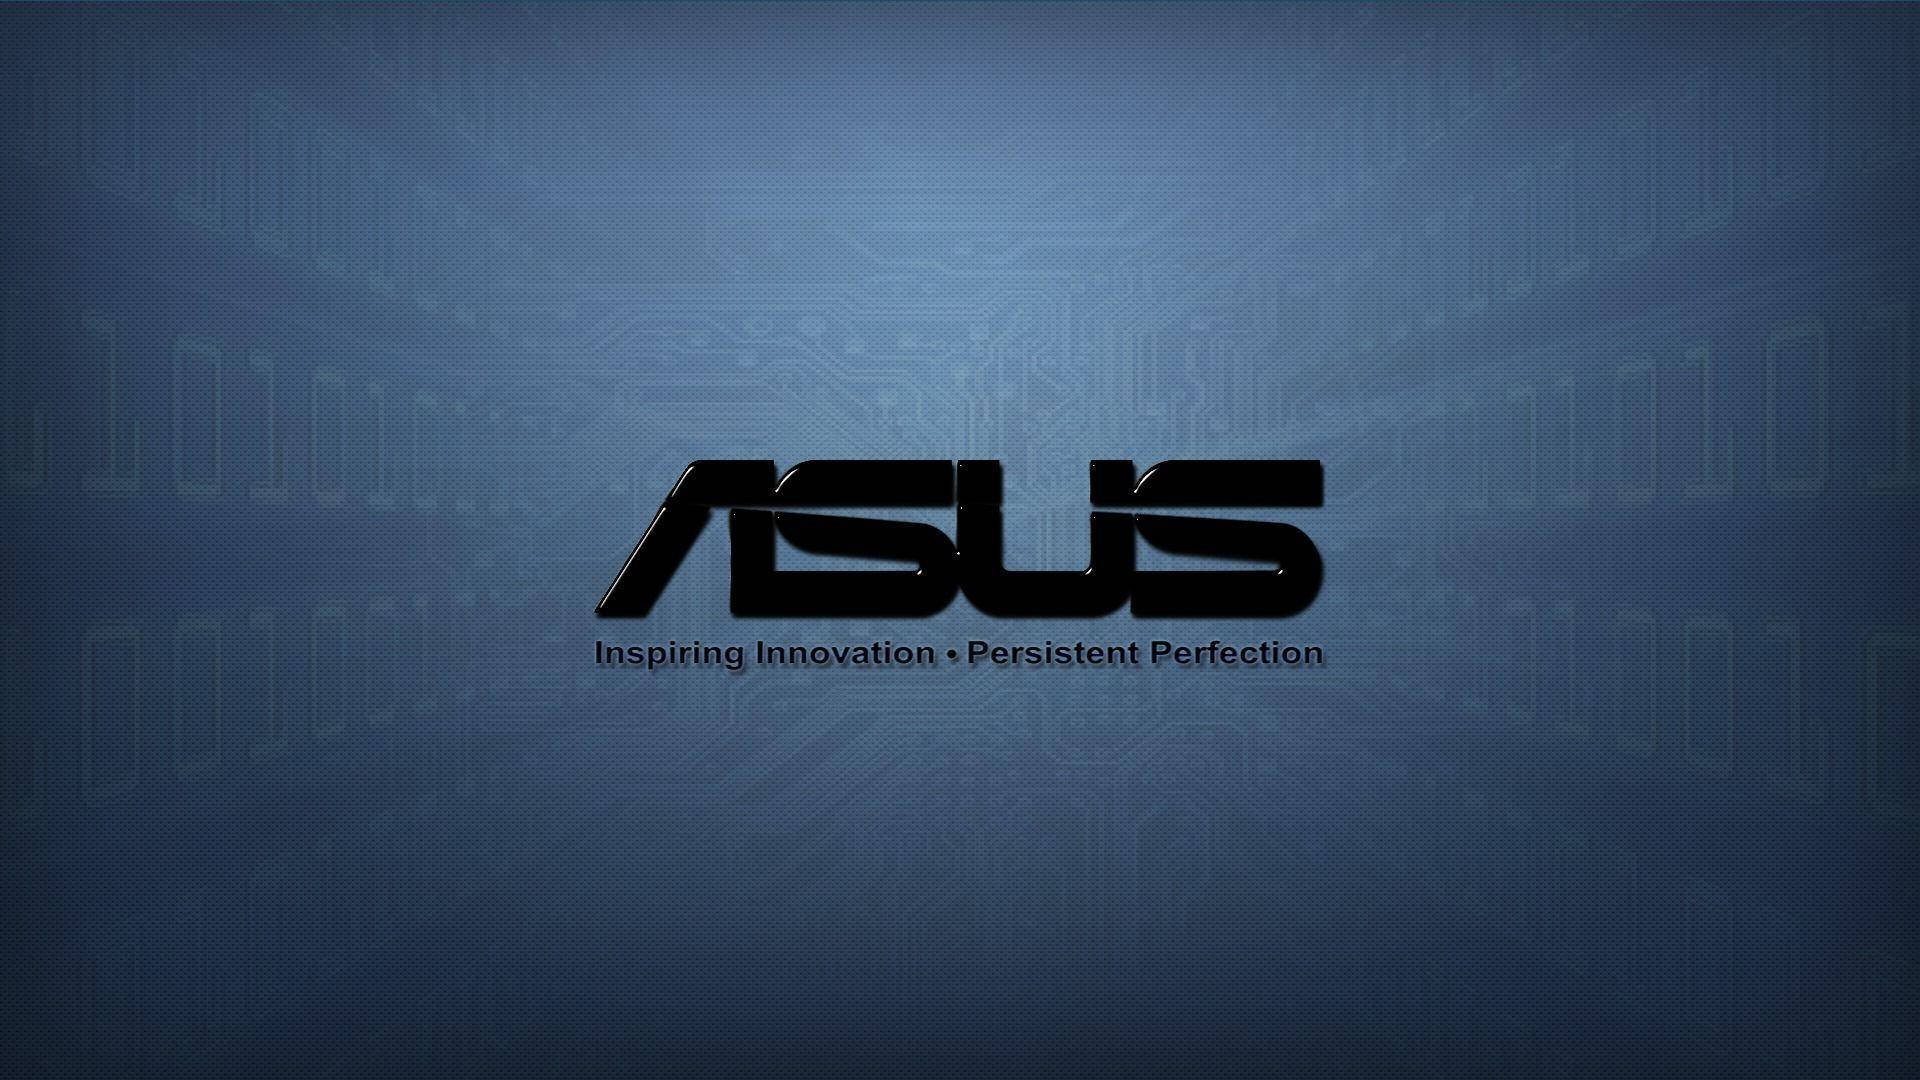 Brighten Up Your Life with an Asus Wallpaper